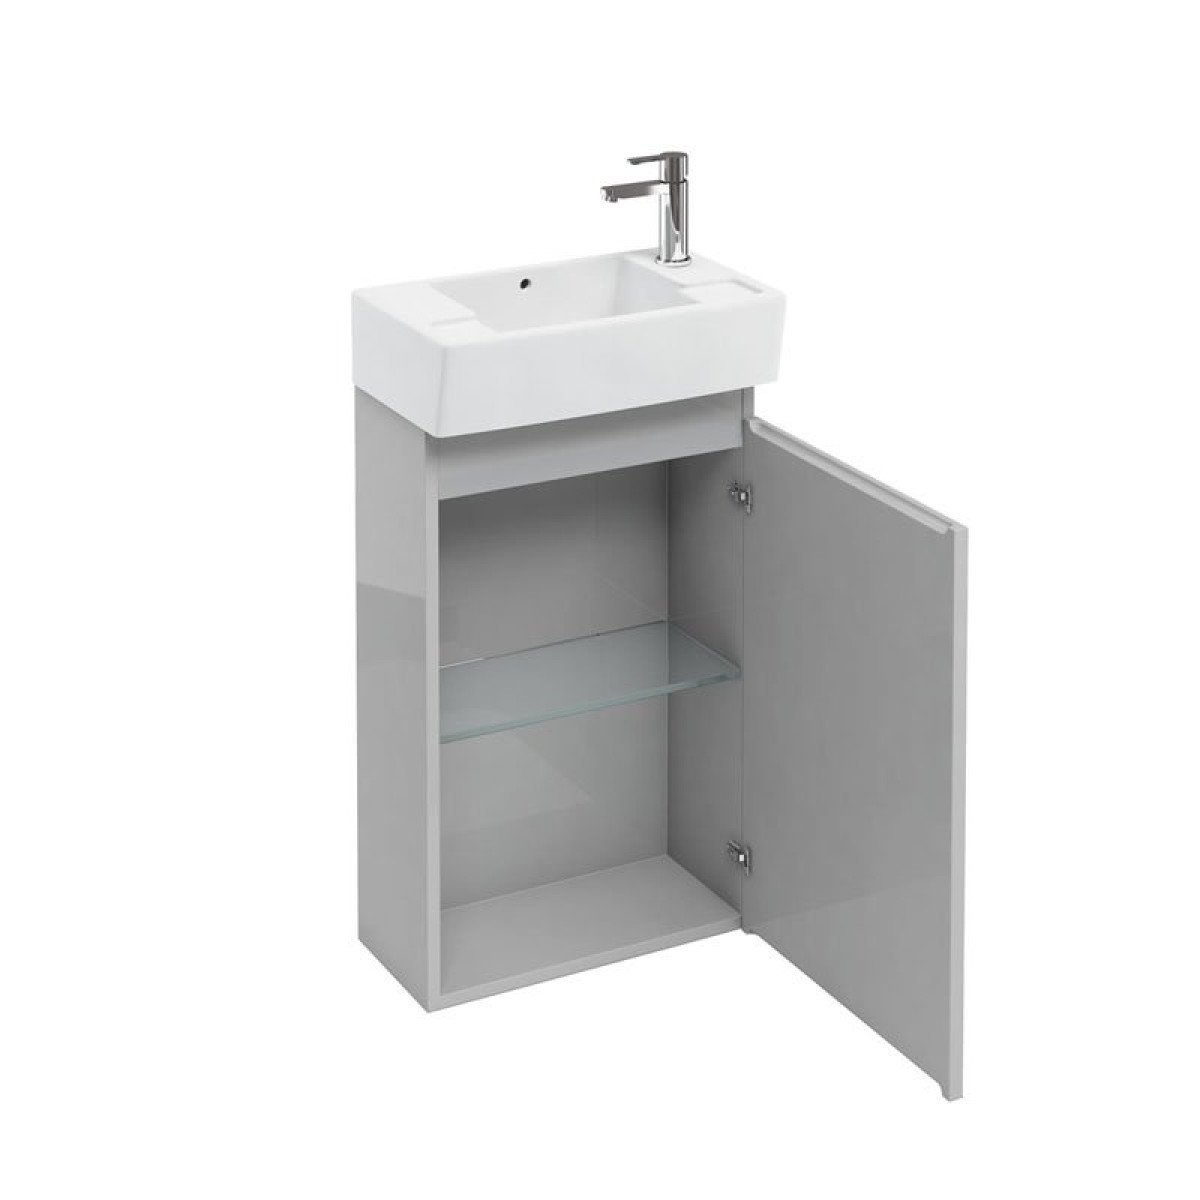 Britton Compact Floor Standing Lh Light, How To Install Cloakroom Vanity Unit